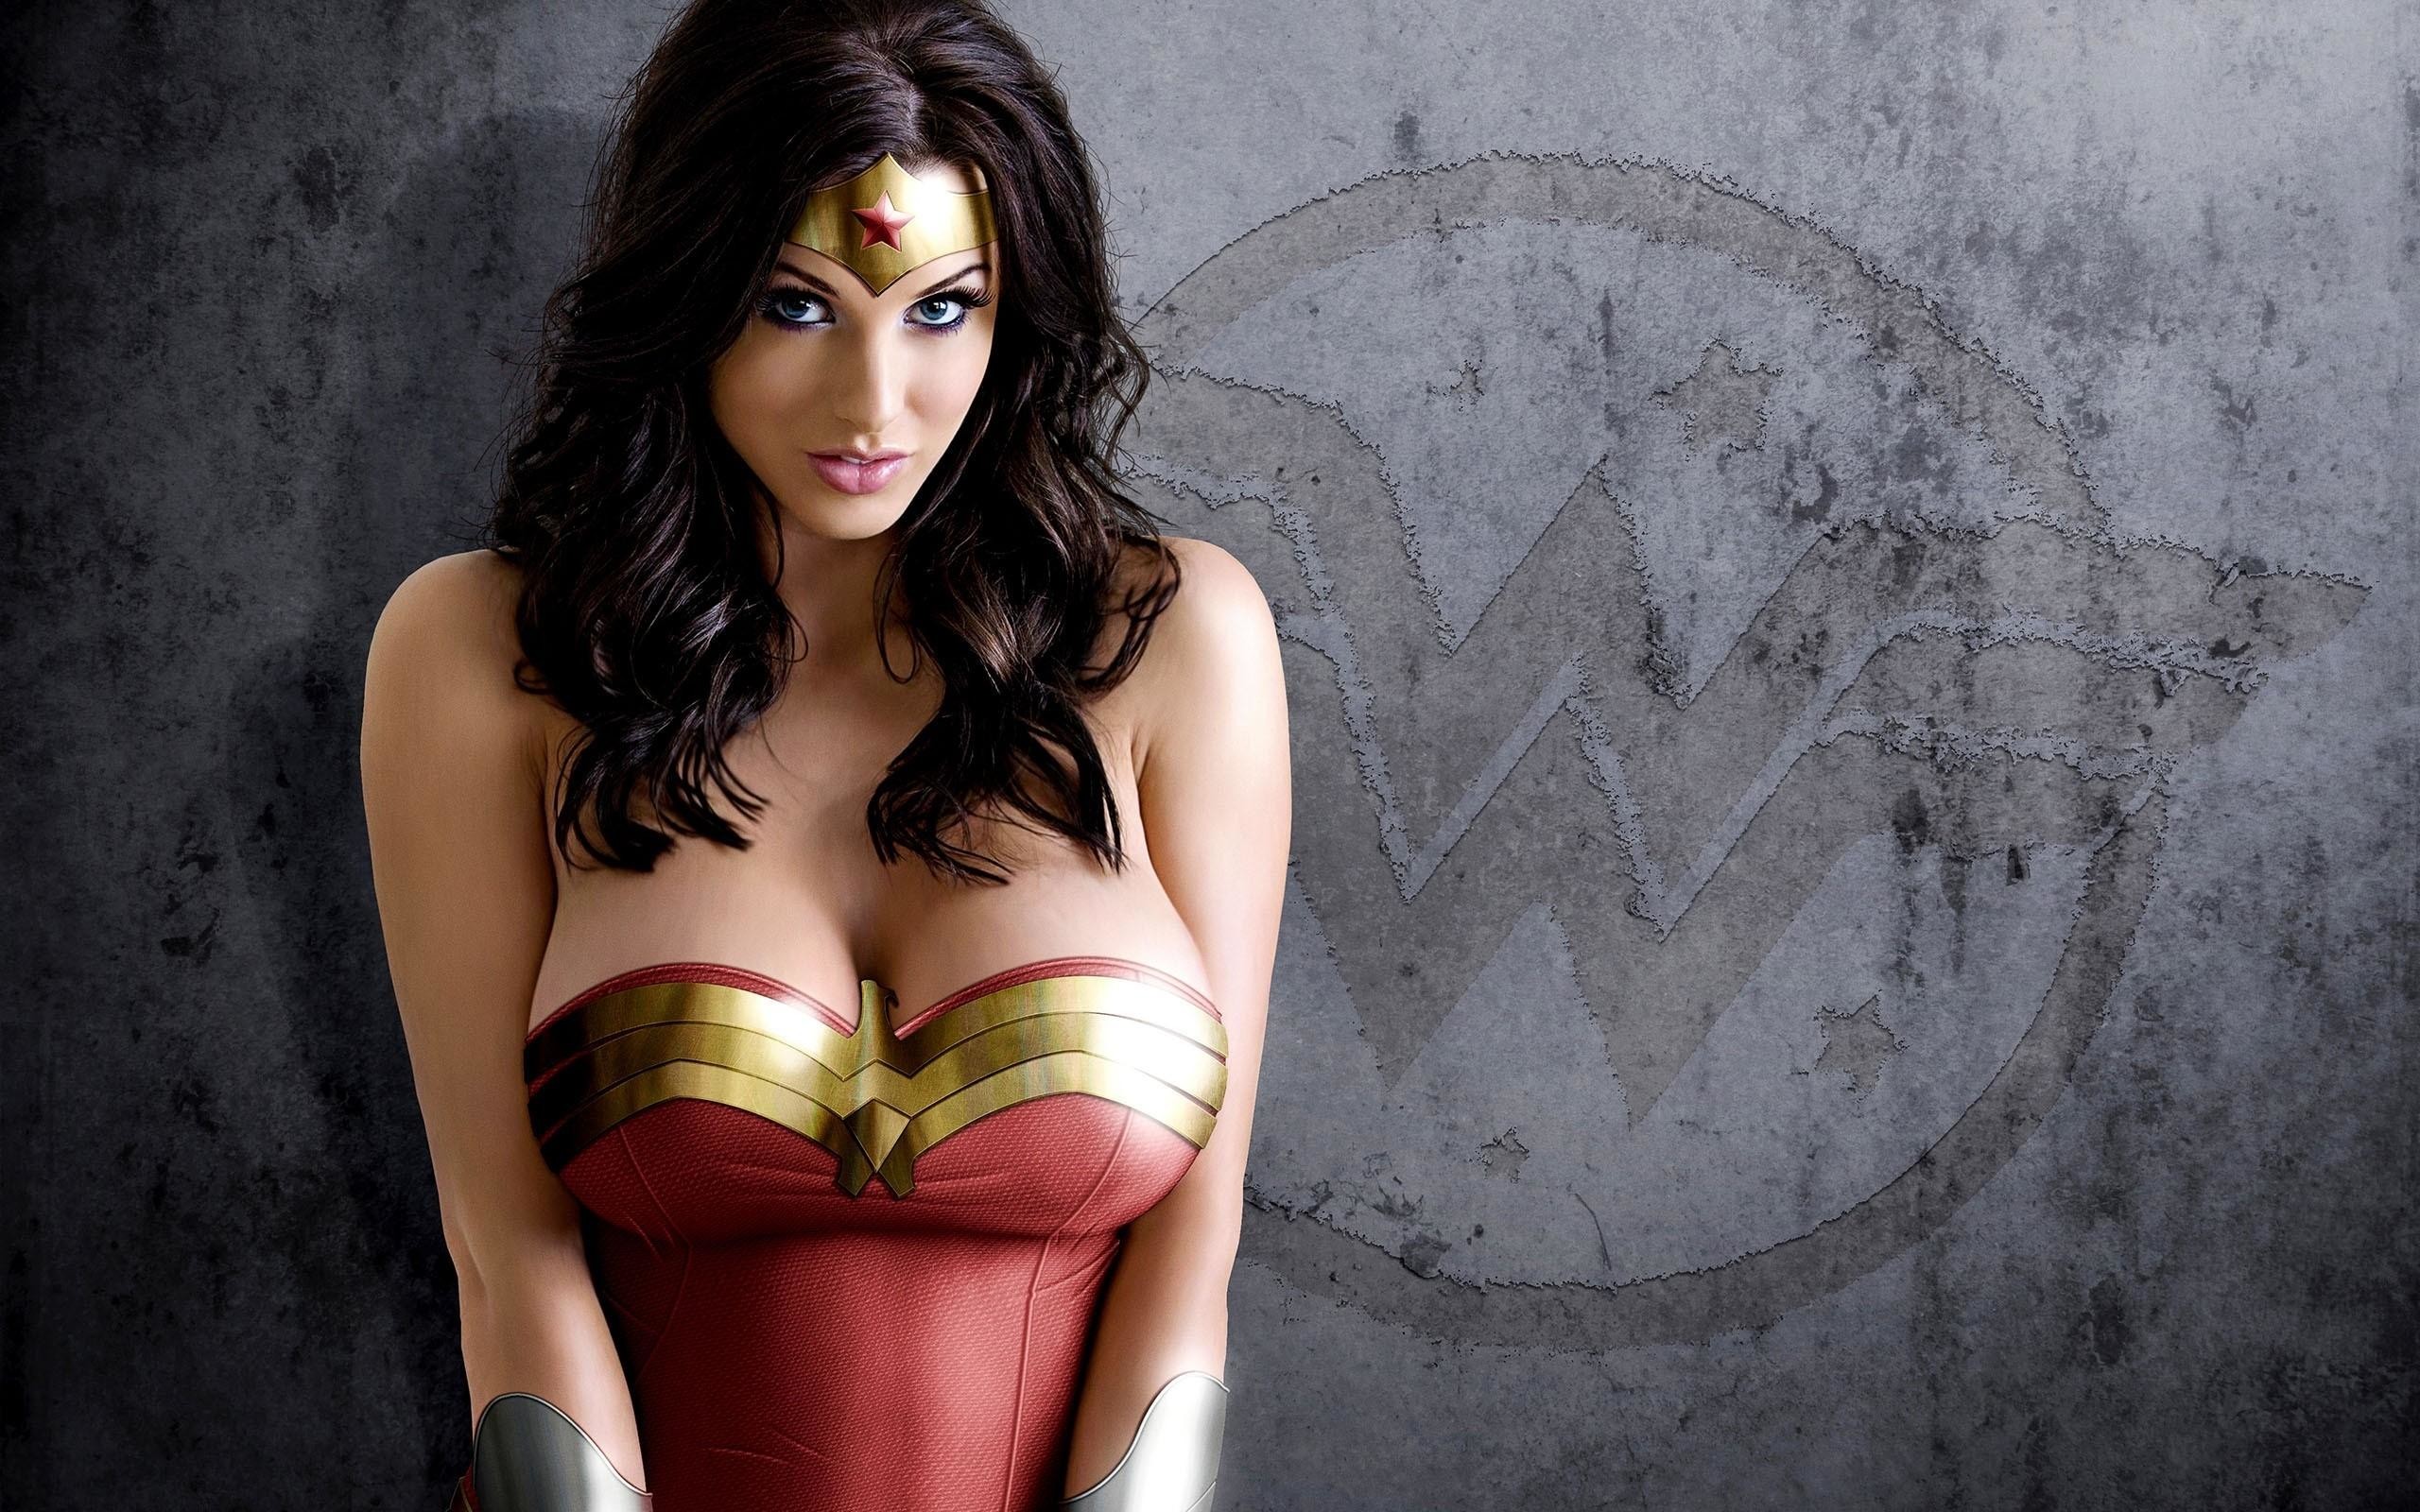 2560x1600 Wonder Woman Wallpapers: Burma Ricard, Browse And Download Free Pictures